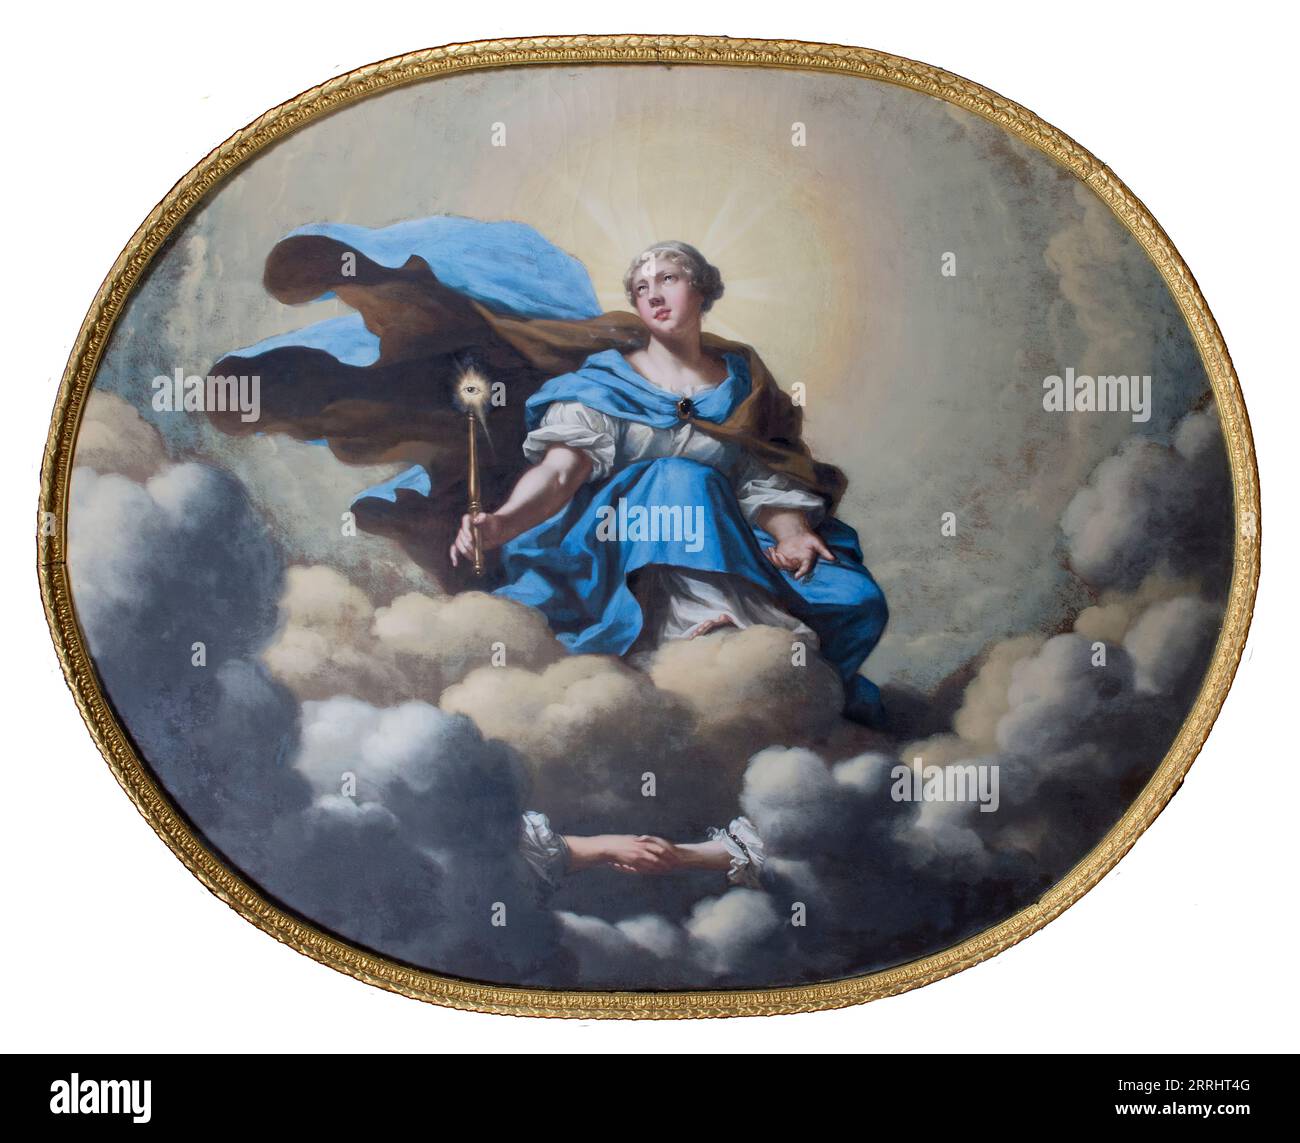 Allegory of King Karl X Gustaf's engagement, 1668. Stock Photo